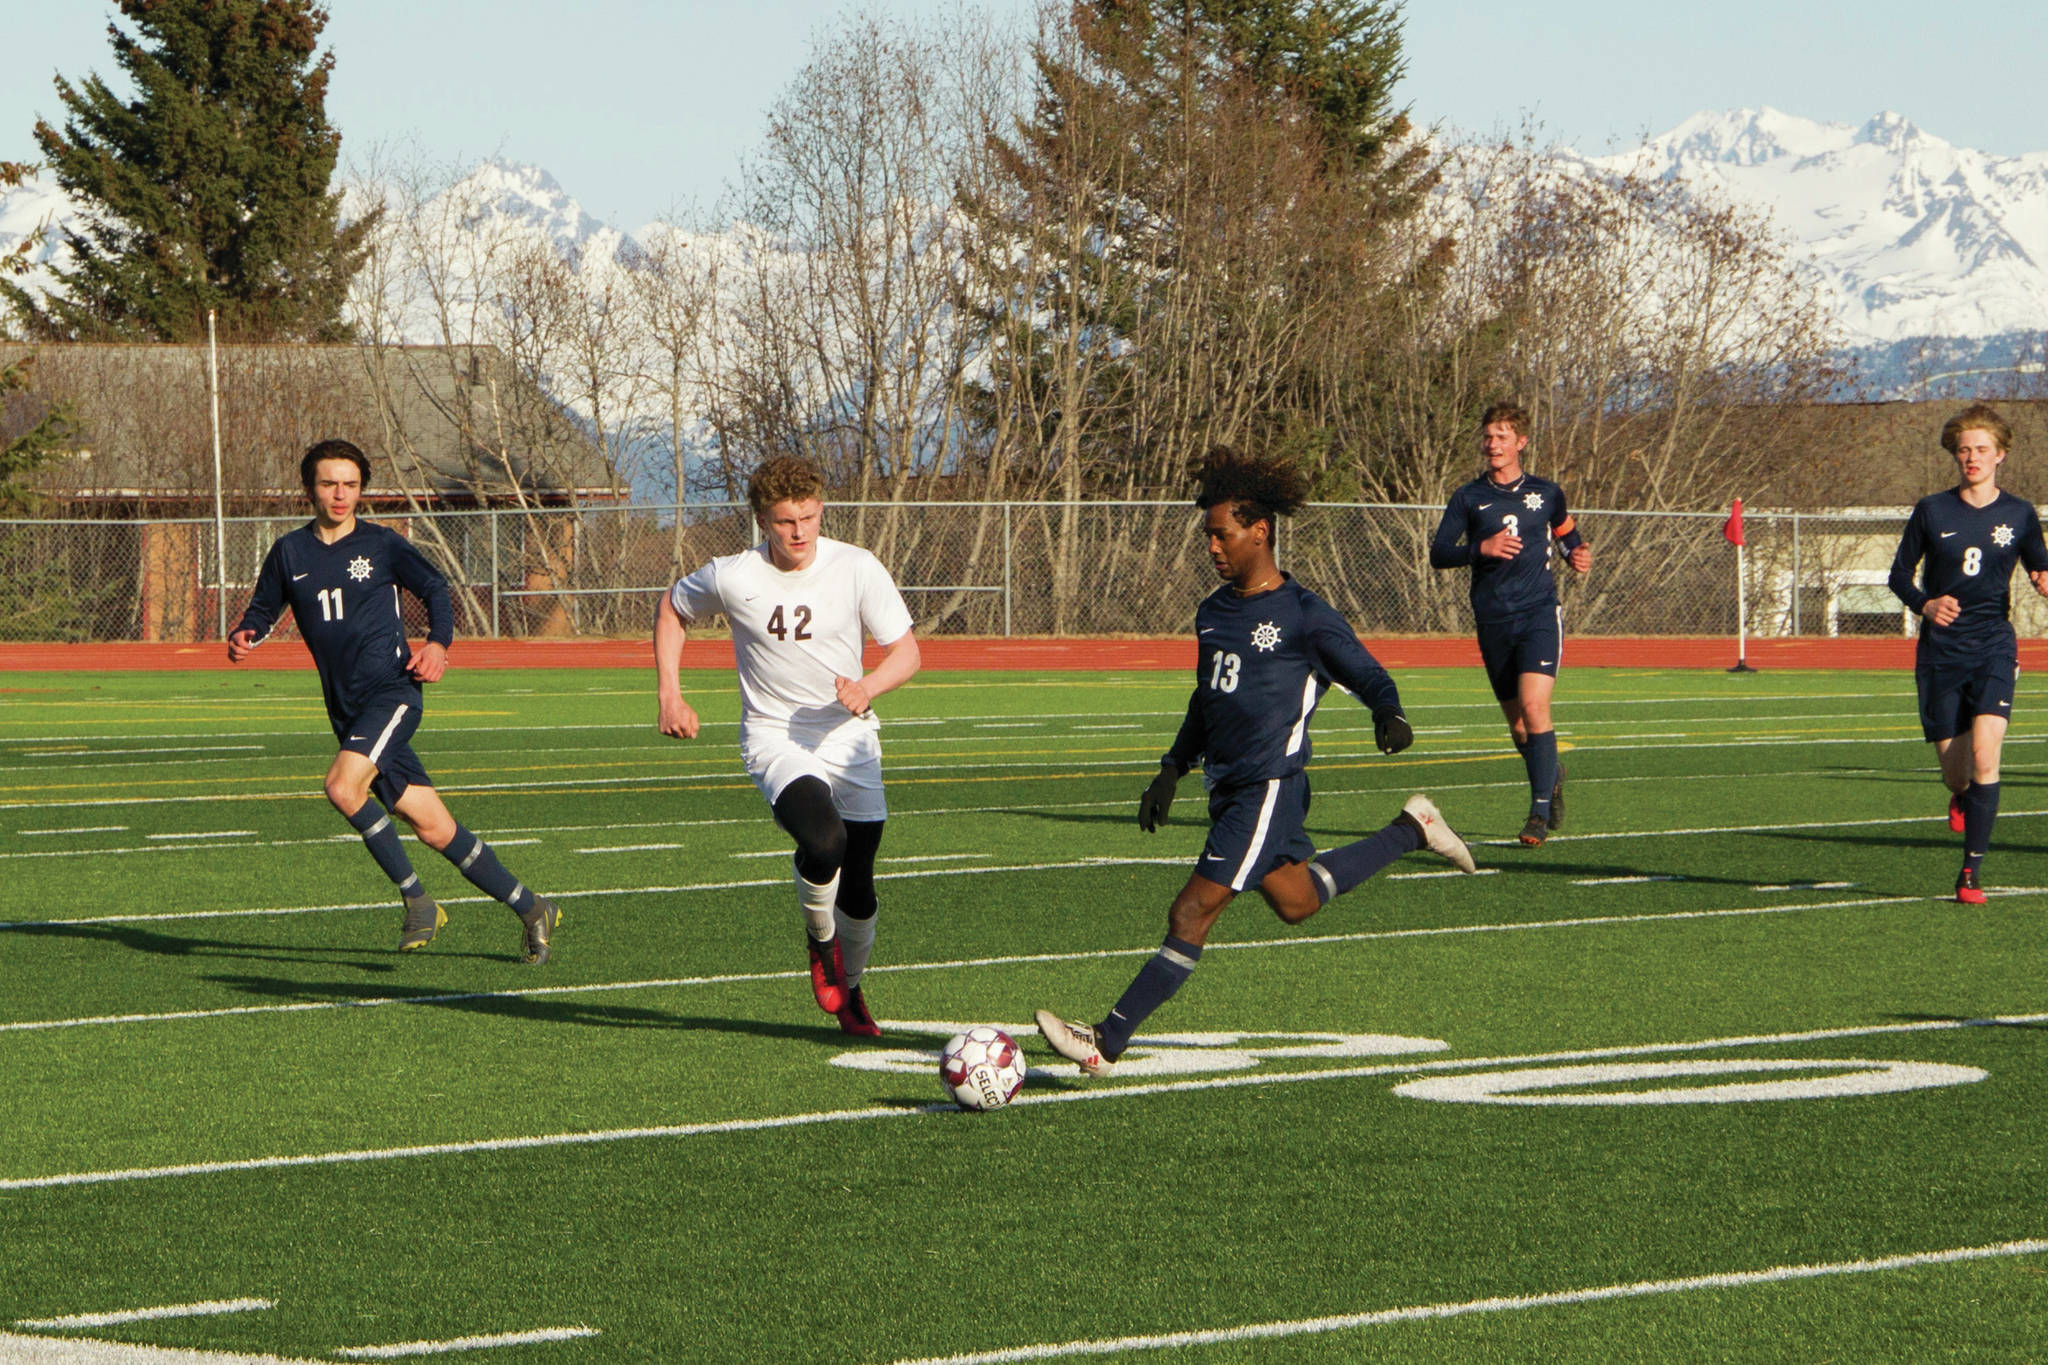 Mariners’ Eyoab Knapp steals the ball from a Grace Christian School player during the soccer game April 30, 2021, at the Homer High School soccer field. (Photo by Sarah Knapp/Homer News)